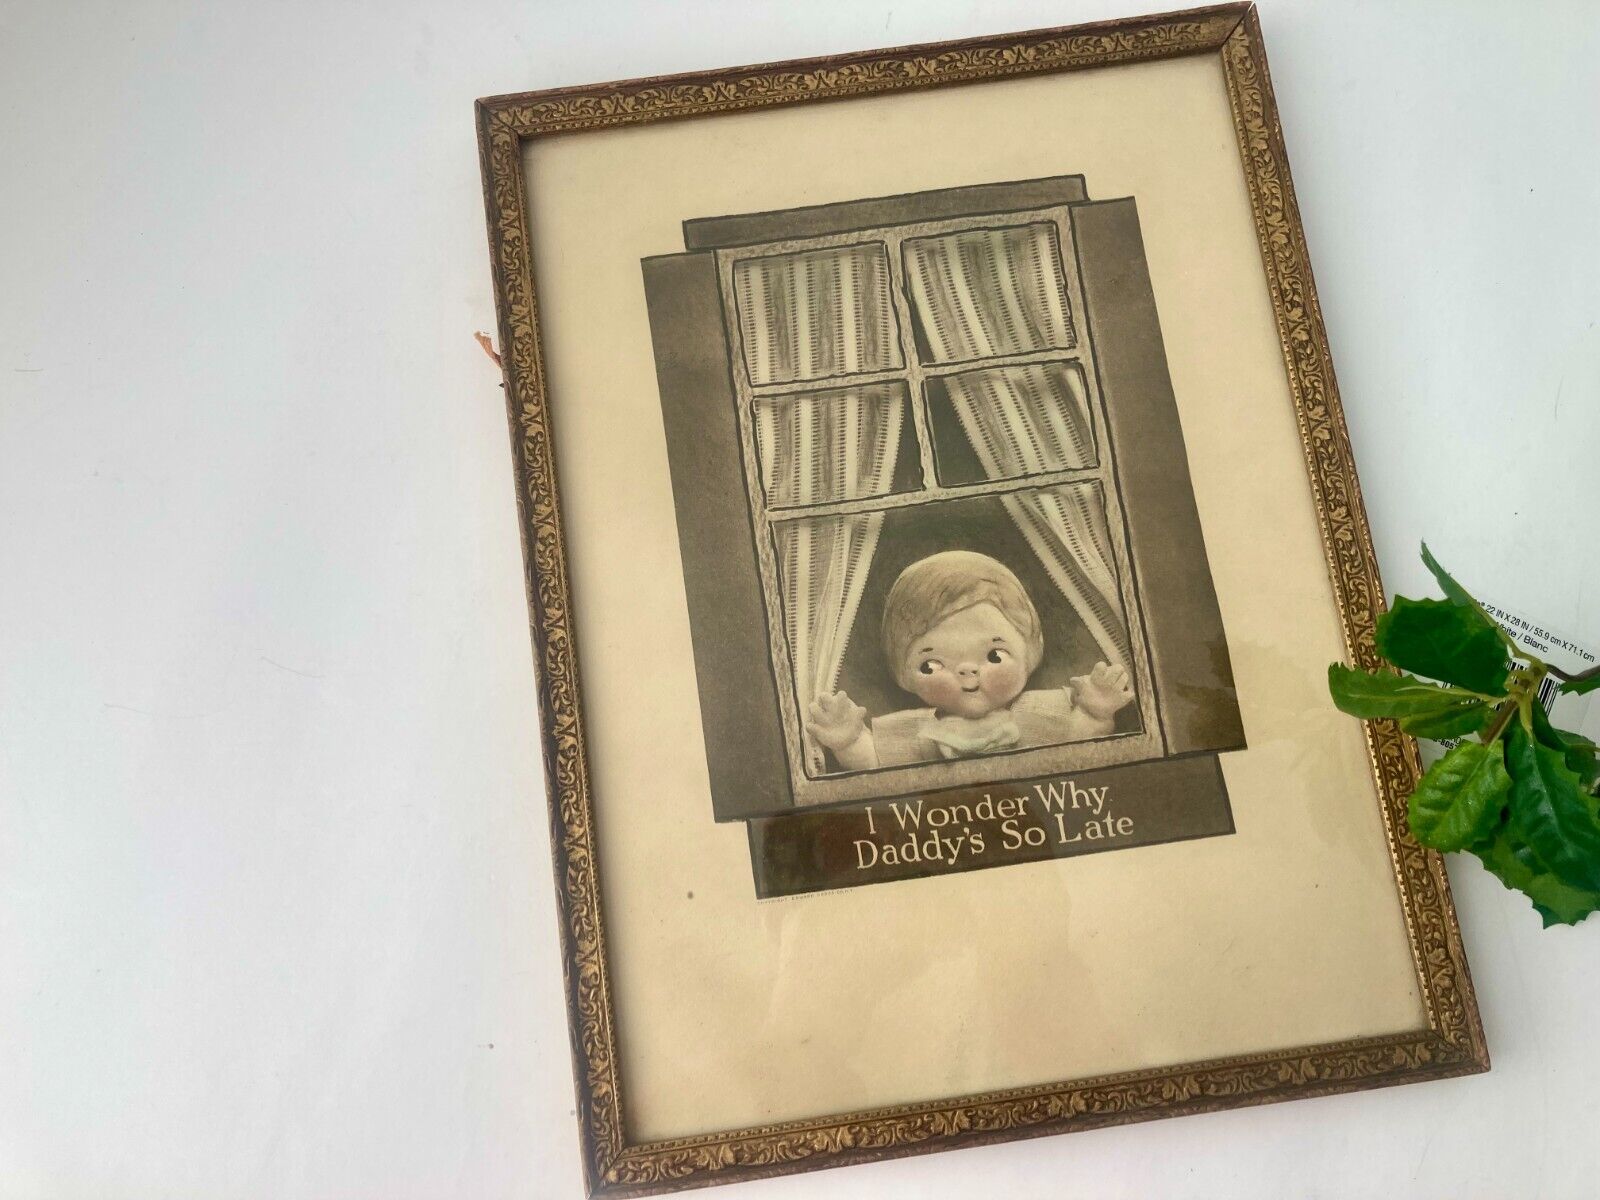 VTG Boy at Window Picture I Wonder Why Daddy’s So Late Pressed Wood Frame Wall